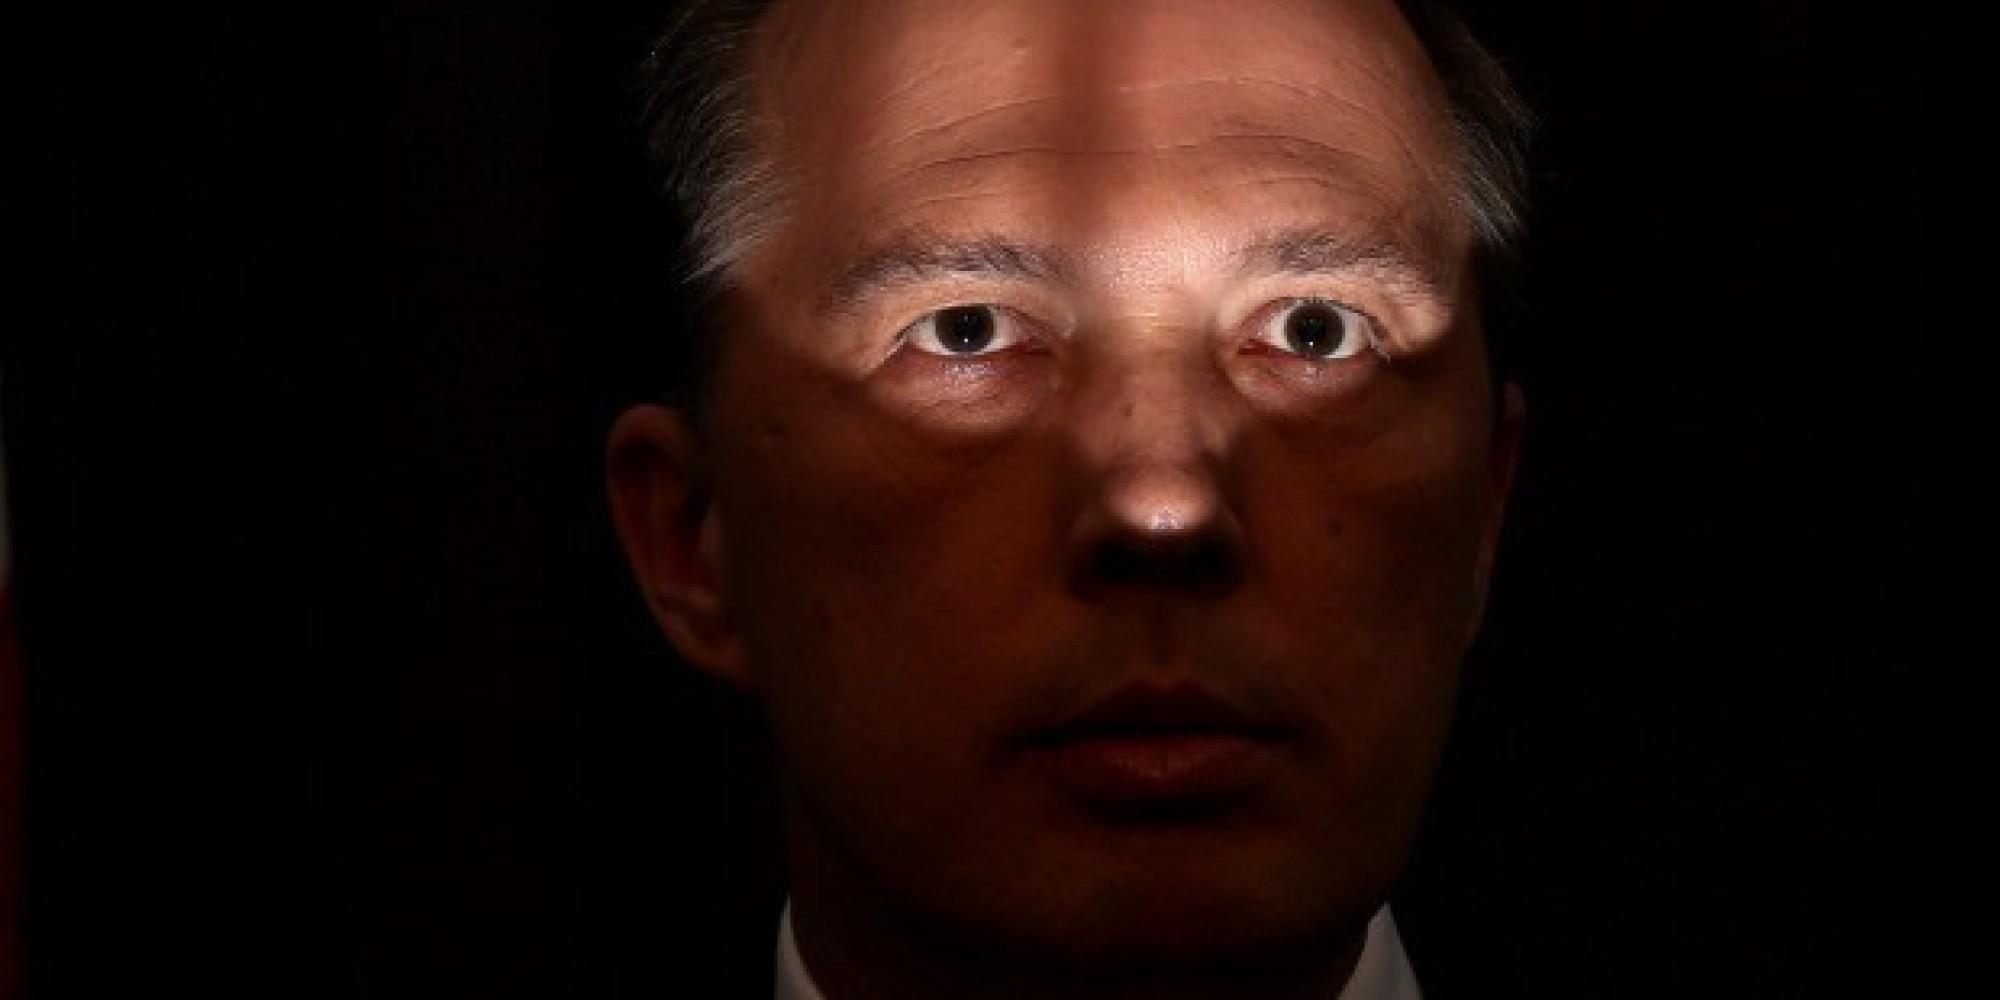 Banal Evil: The Peter Dutton Story - Lost Online